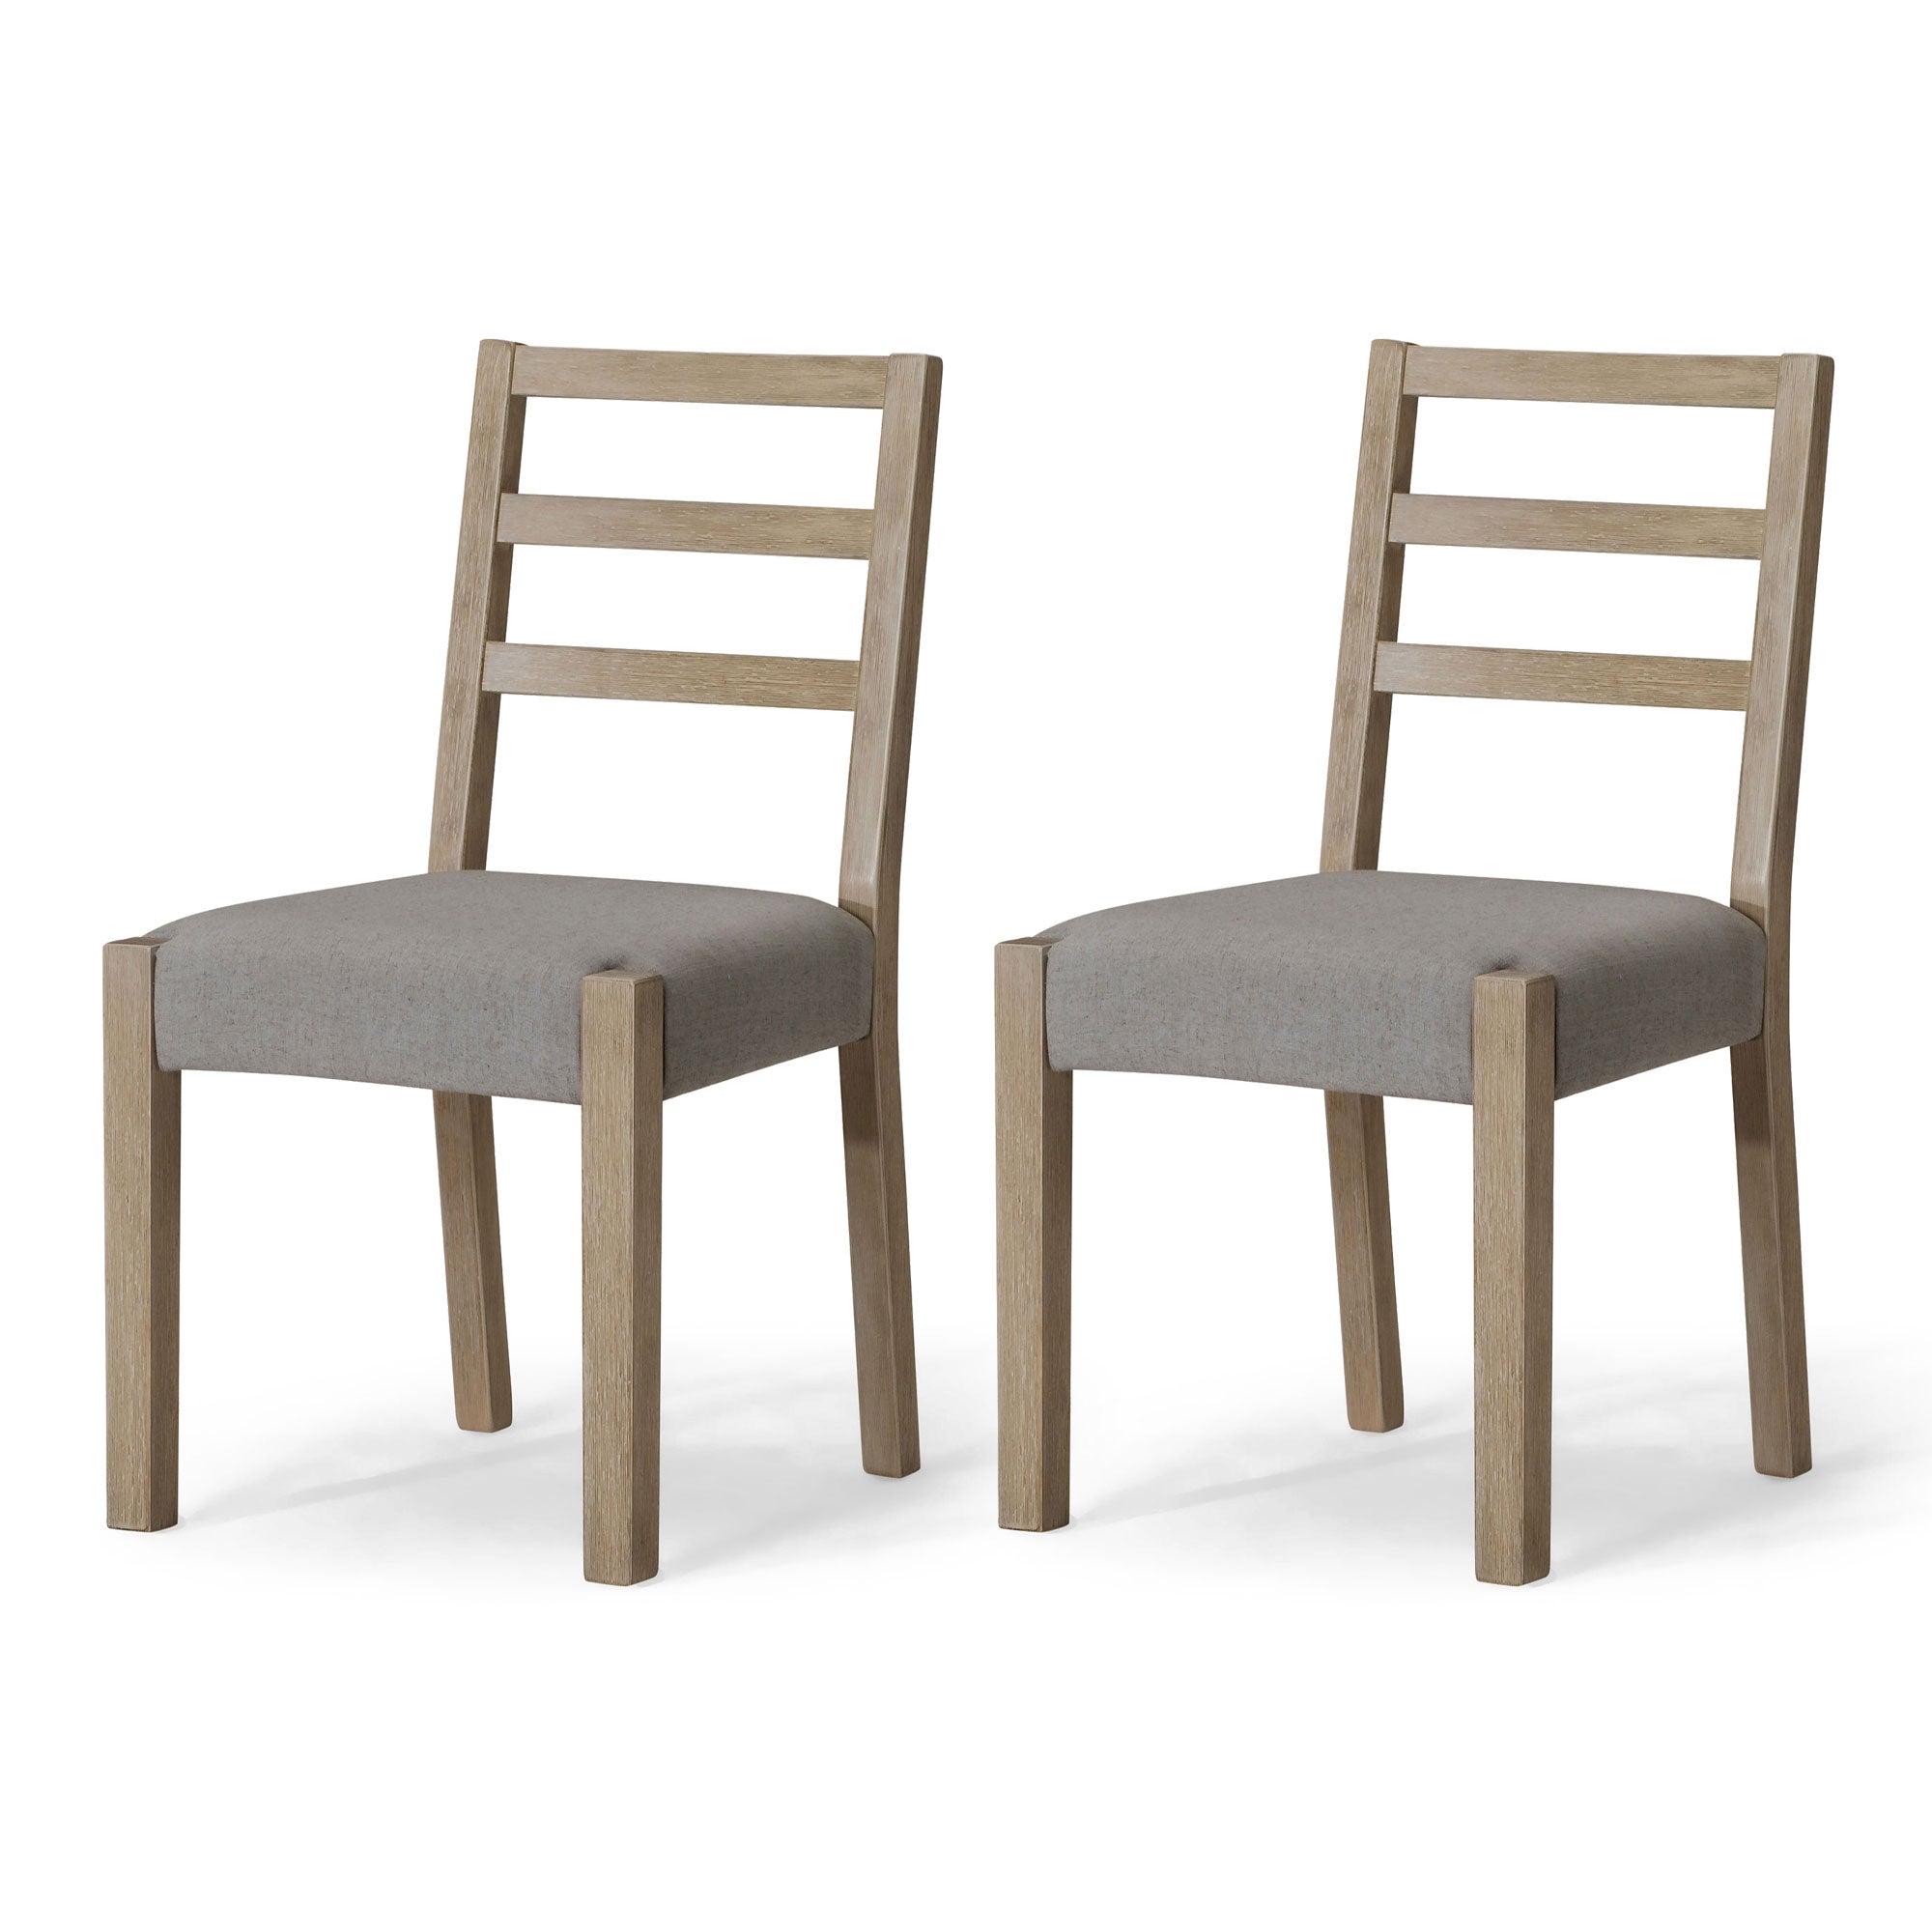 Maven-Lane-Willow-Rustic-Dining-Chair,-Grey-With-Slate-Linen-Fabric,-Set-of-2-Kitchen-&-Dining-Room-Chairs